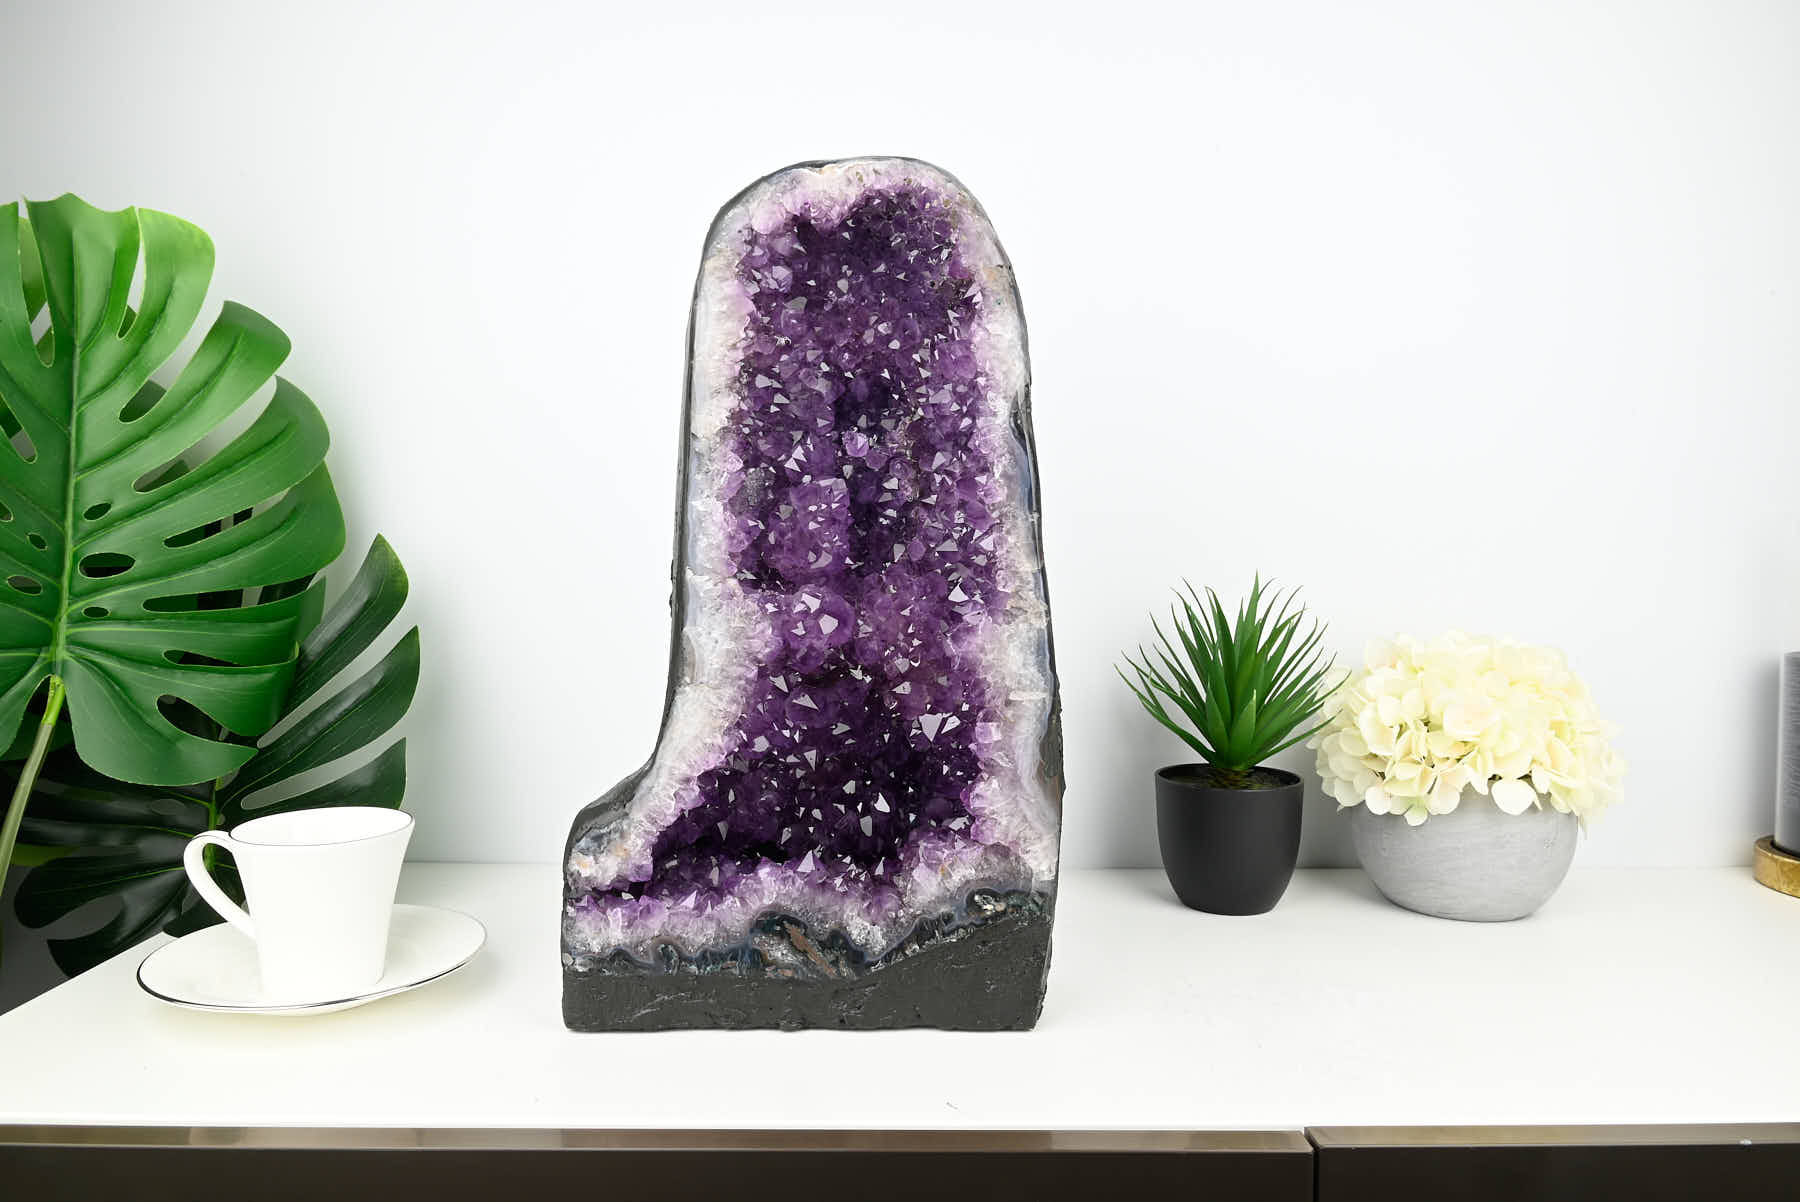 Extra Quality Amethyst Cathedral - 16.96kg, 43cm tall - #CAAMET-10050